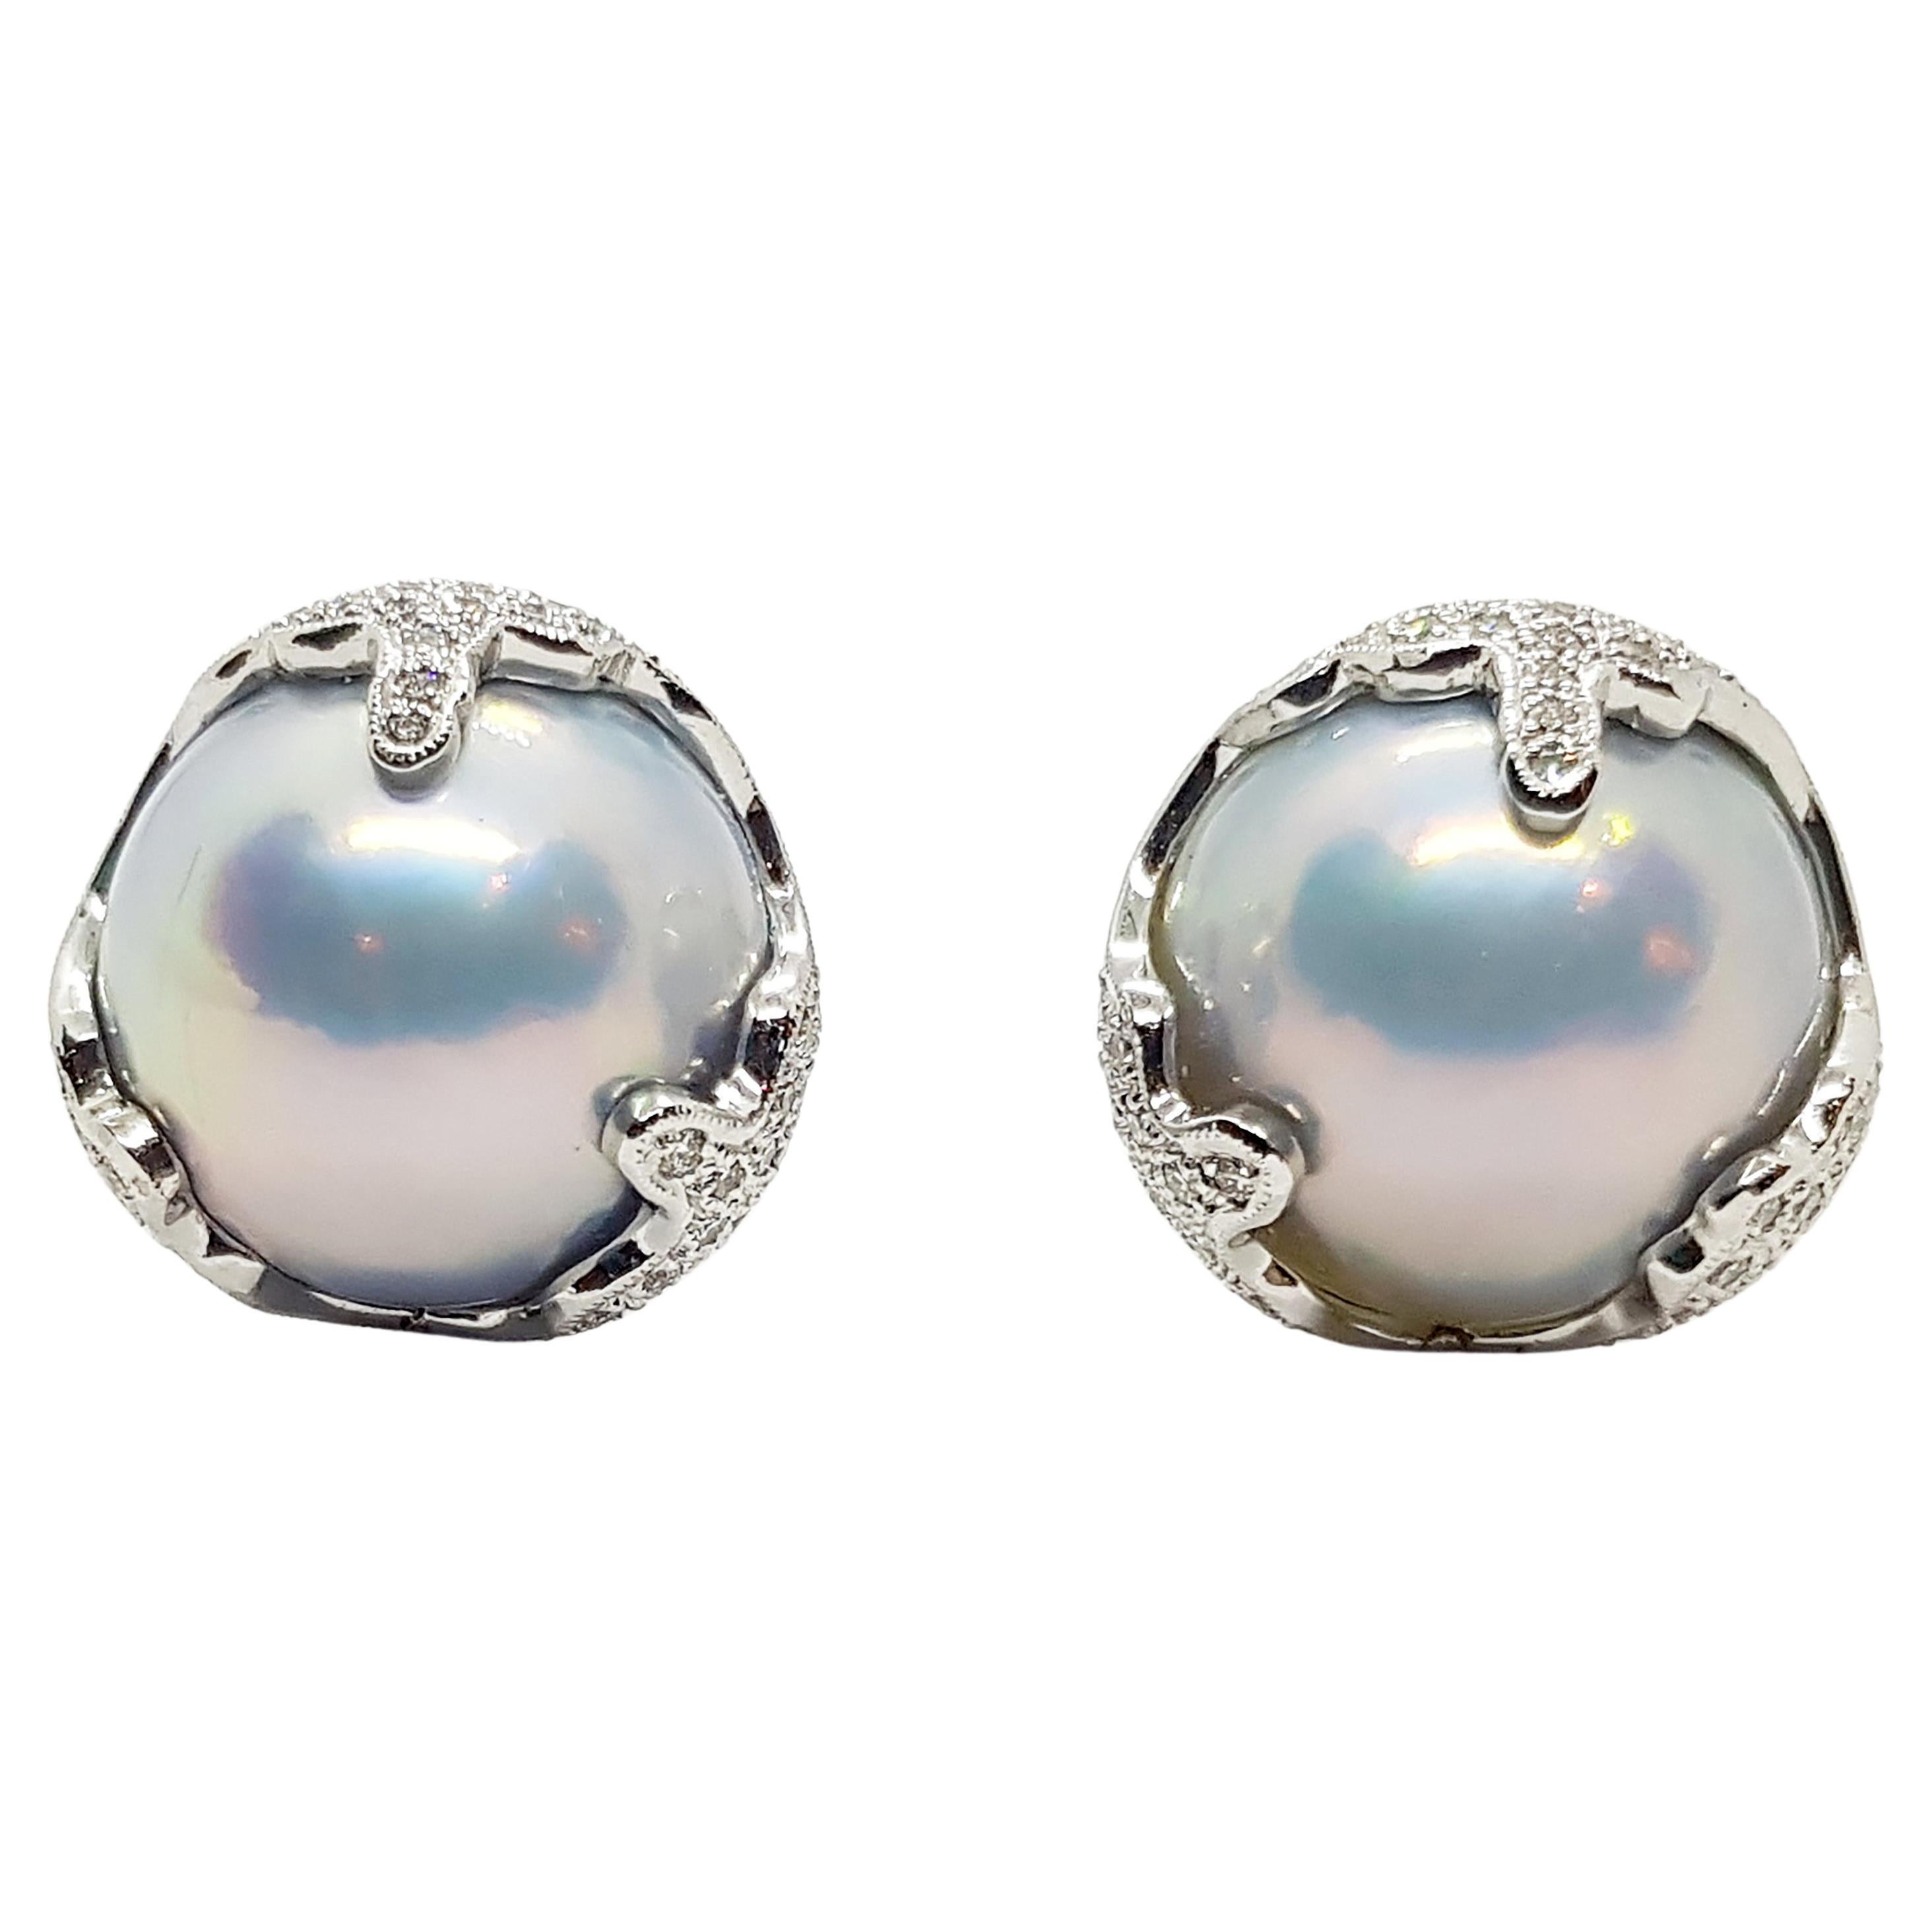 Mabe Pearl with Diamond Earrings Set in 18 Karat White Gold Settings